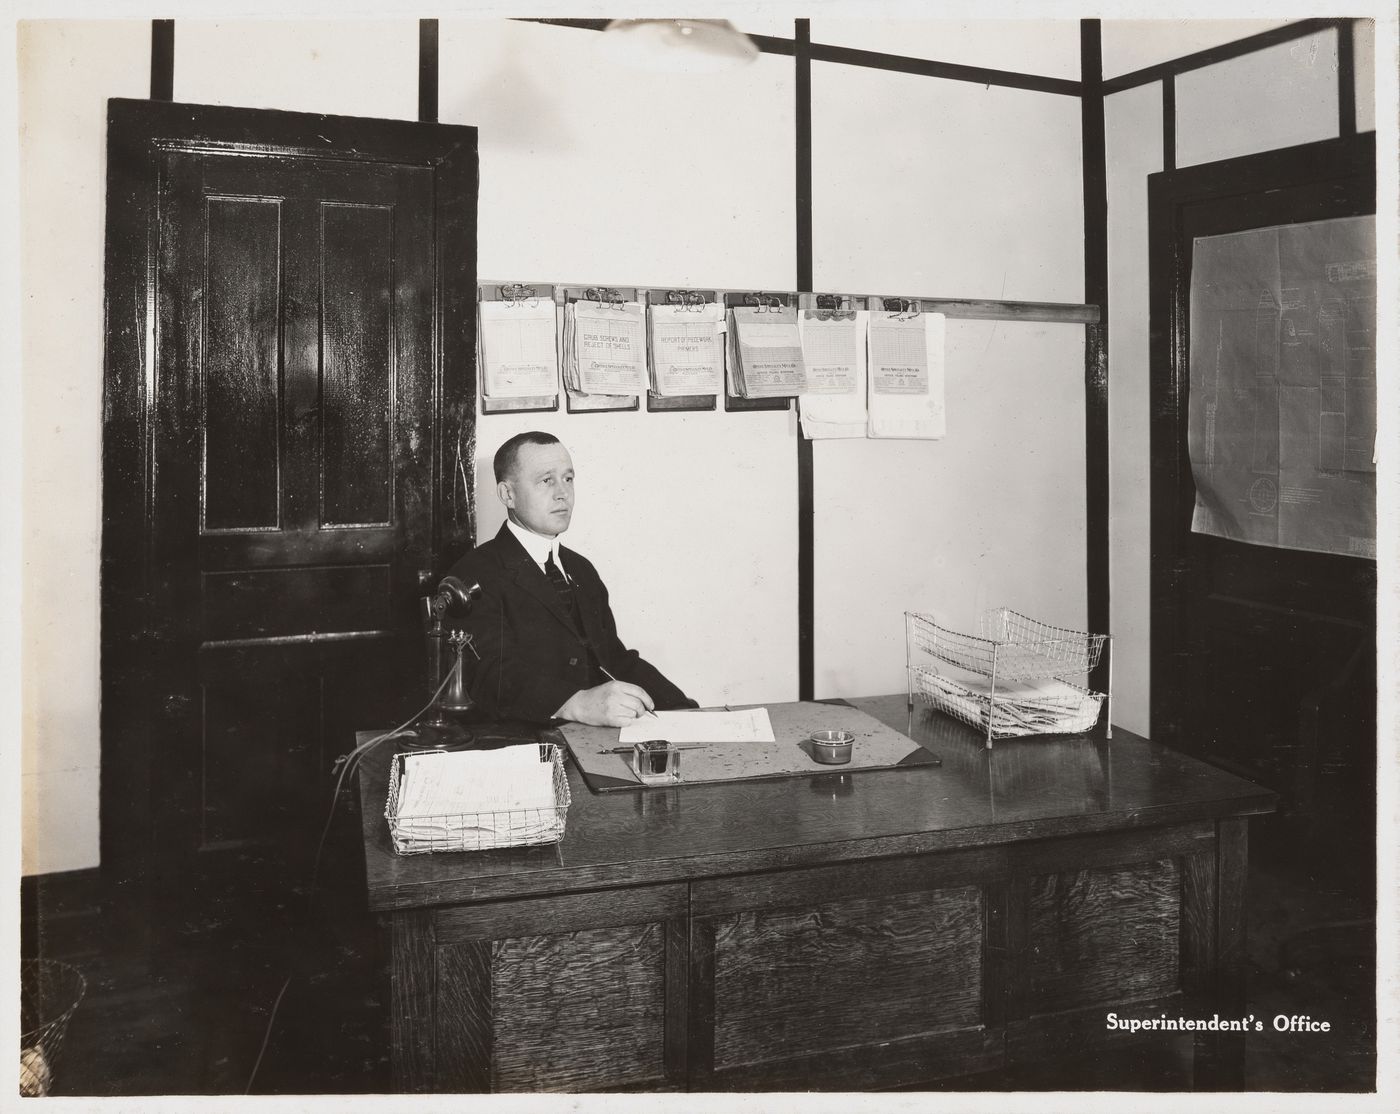 Interior view of superintendent's office at the Energite Explosives Plant No. 3, the Shell Loading Plant, Renfrew, Ontario, Canada